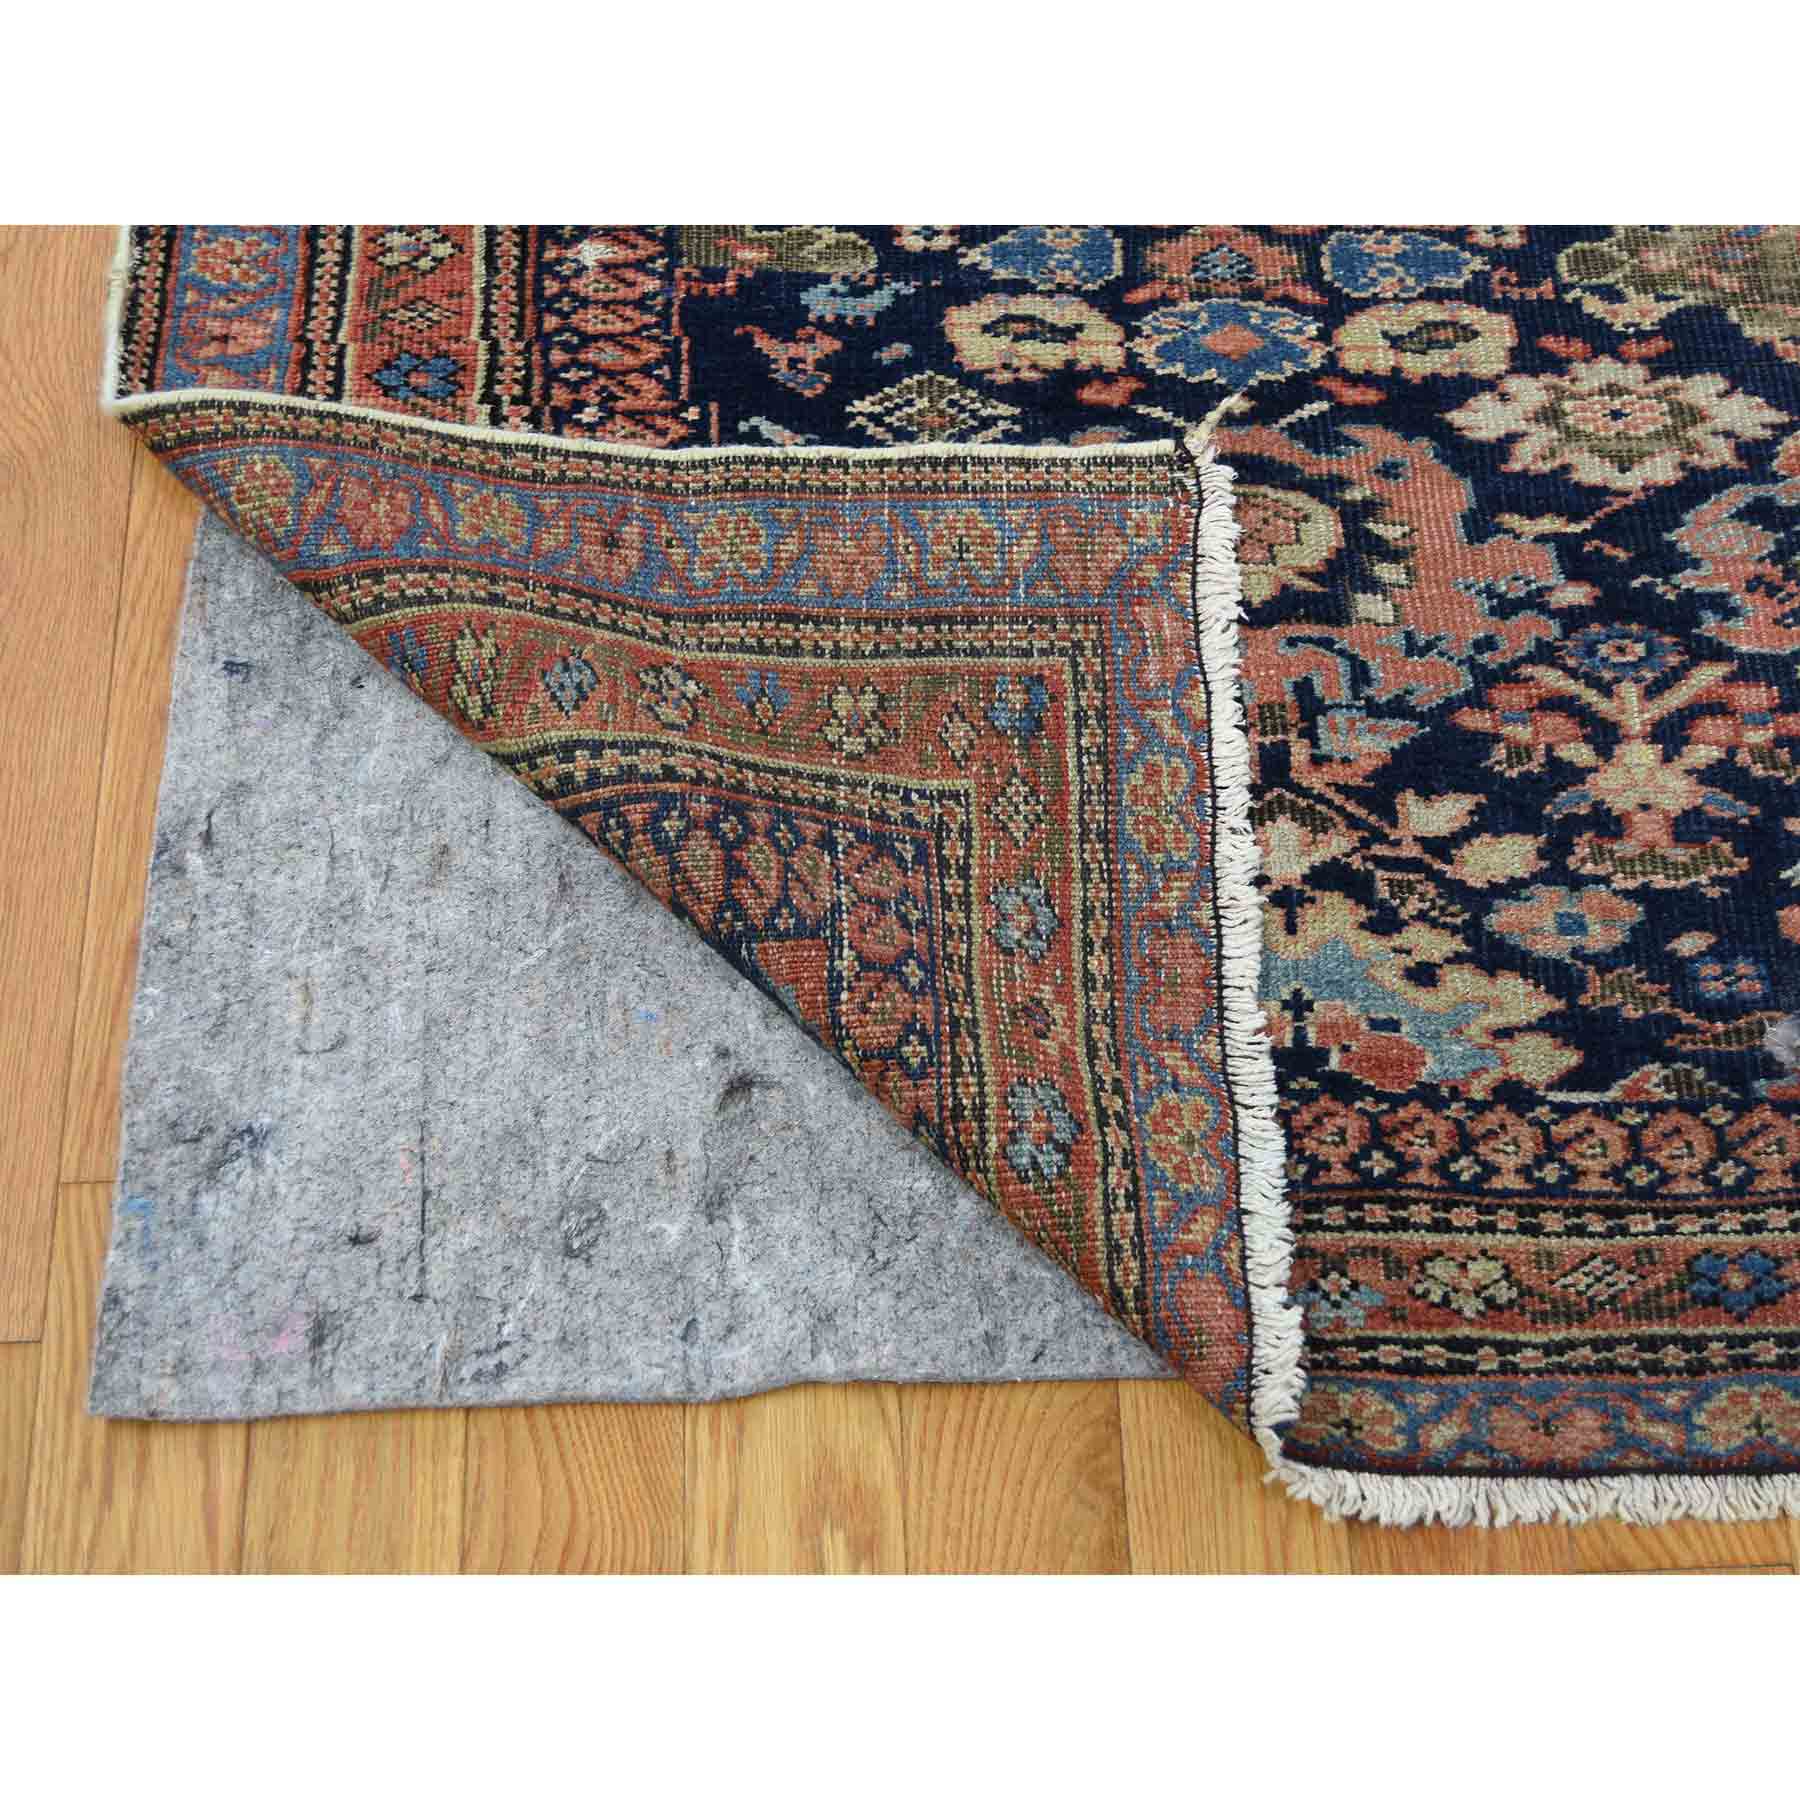 Antique-Hand-Knotted-Rug-224345